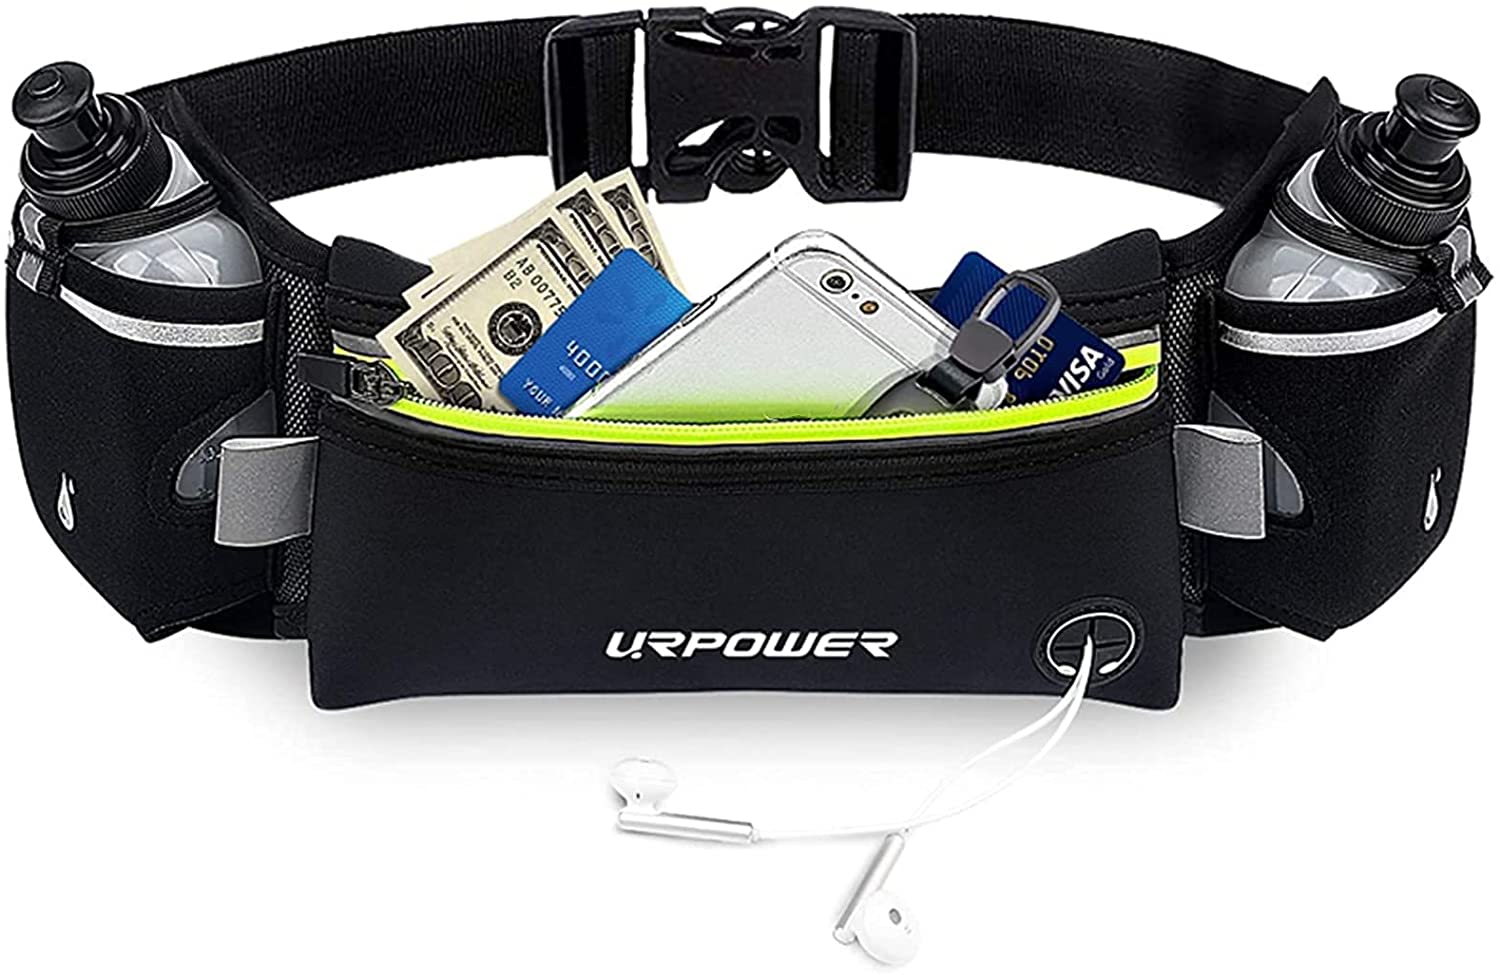 URPOWER Running Belt Multifunctional Zipper Pockets Water Resistant Waist Bag with 2 Water Bottles Waist Pack for Running Hiking Cycling Climbing and for 6.1 inches Smartphones 